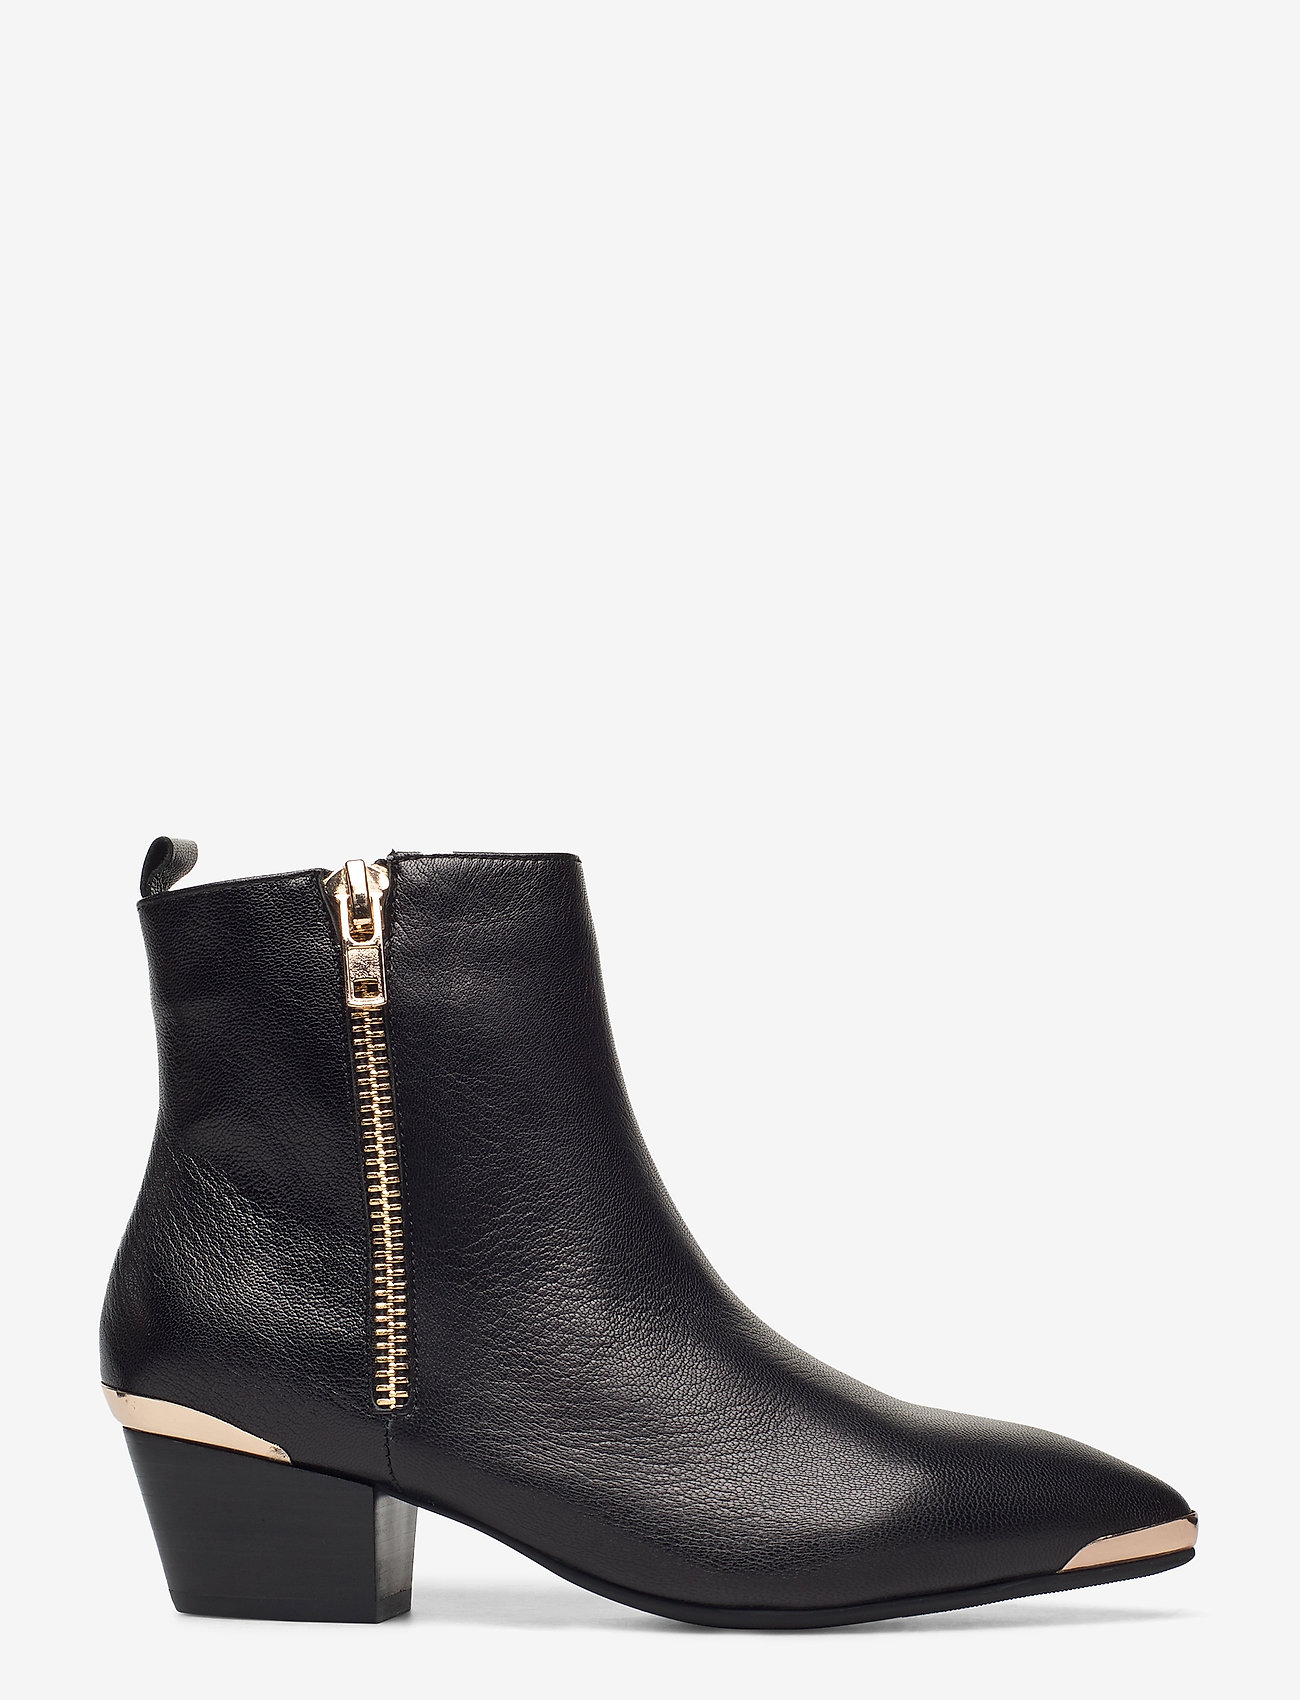 Sofie Schnoor Boot 4,5 Cm - Heeled ankle boots | Boozt.com